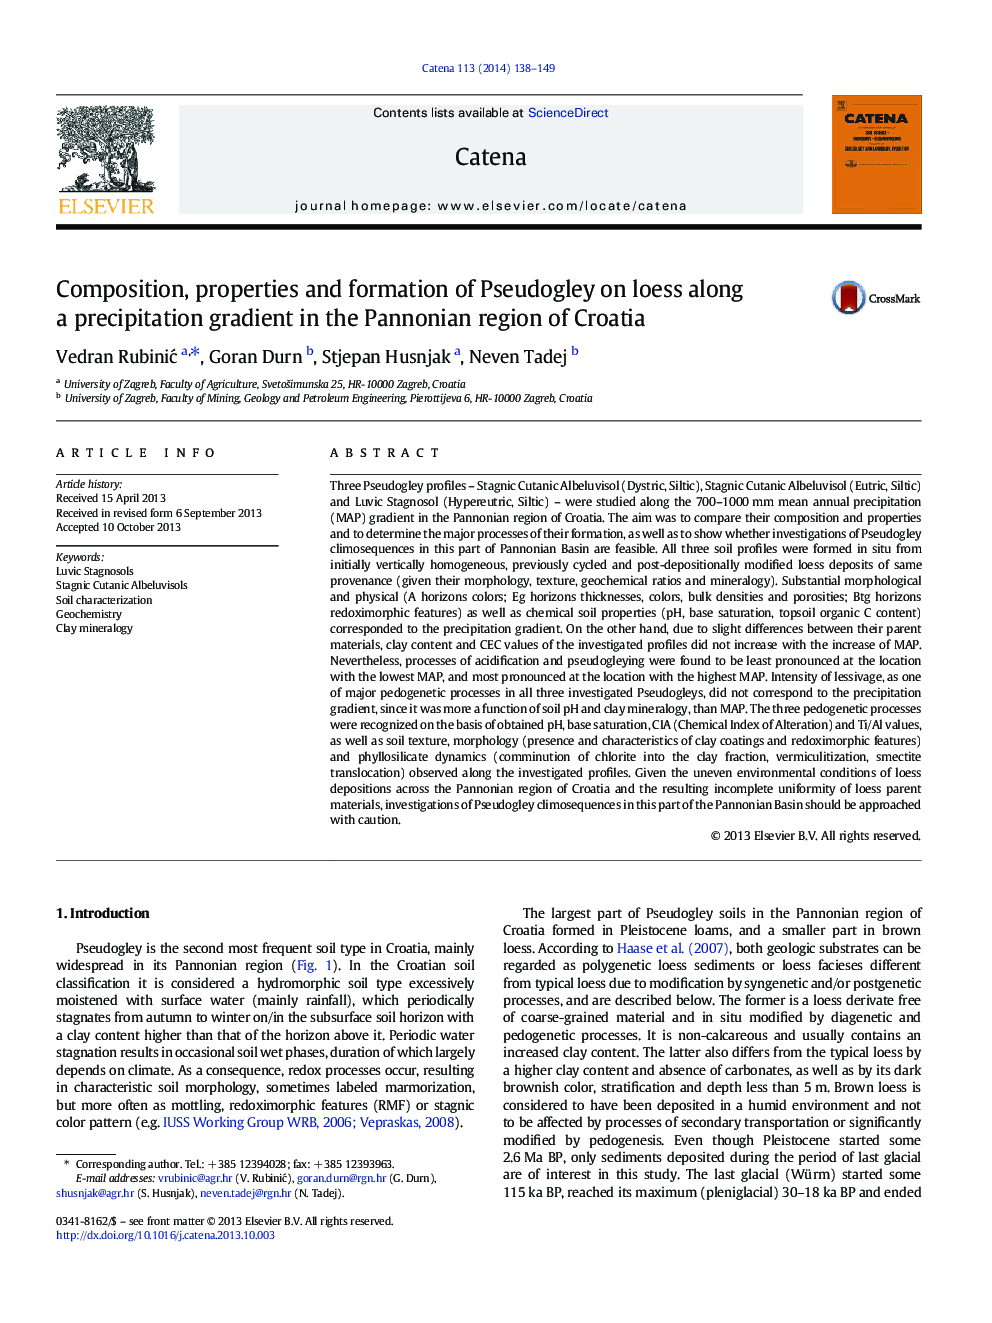 Composition, properties and formation of Pseudogley on loess along a precipitation gradient in the Pannonian region of Croatia